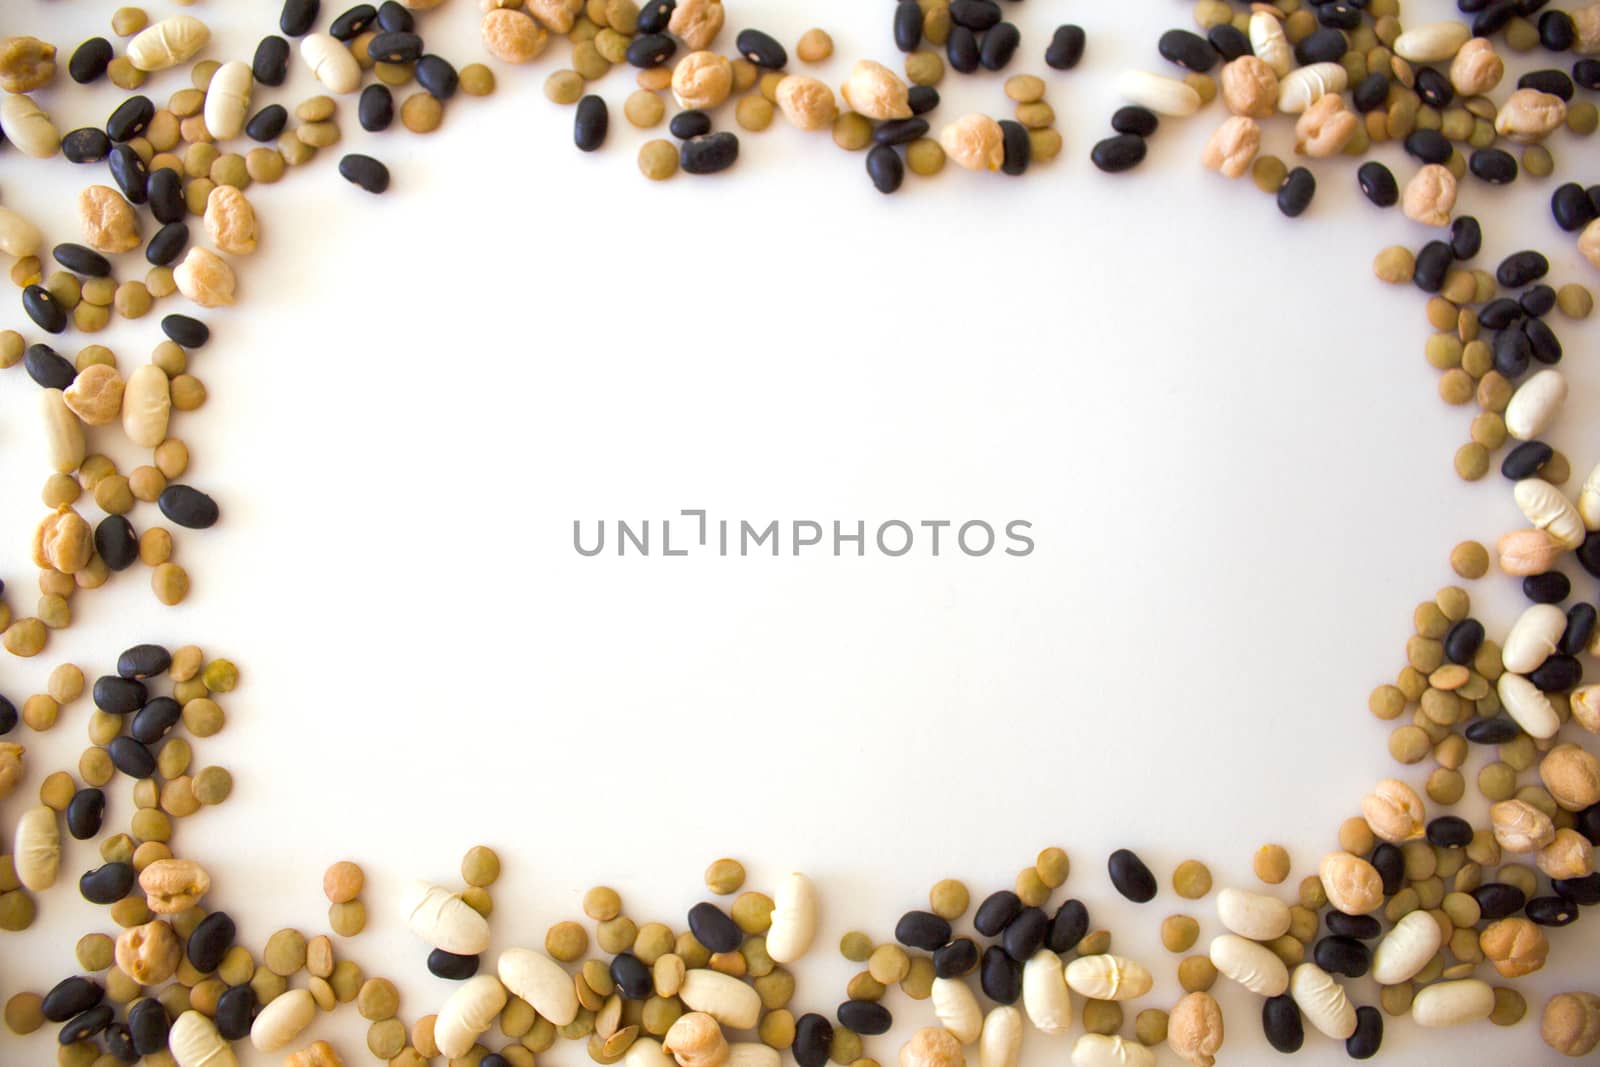 white beans, black beans, peas and lentils arranged in frame form